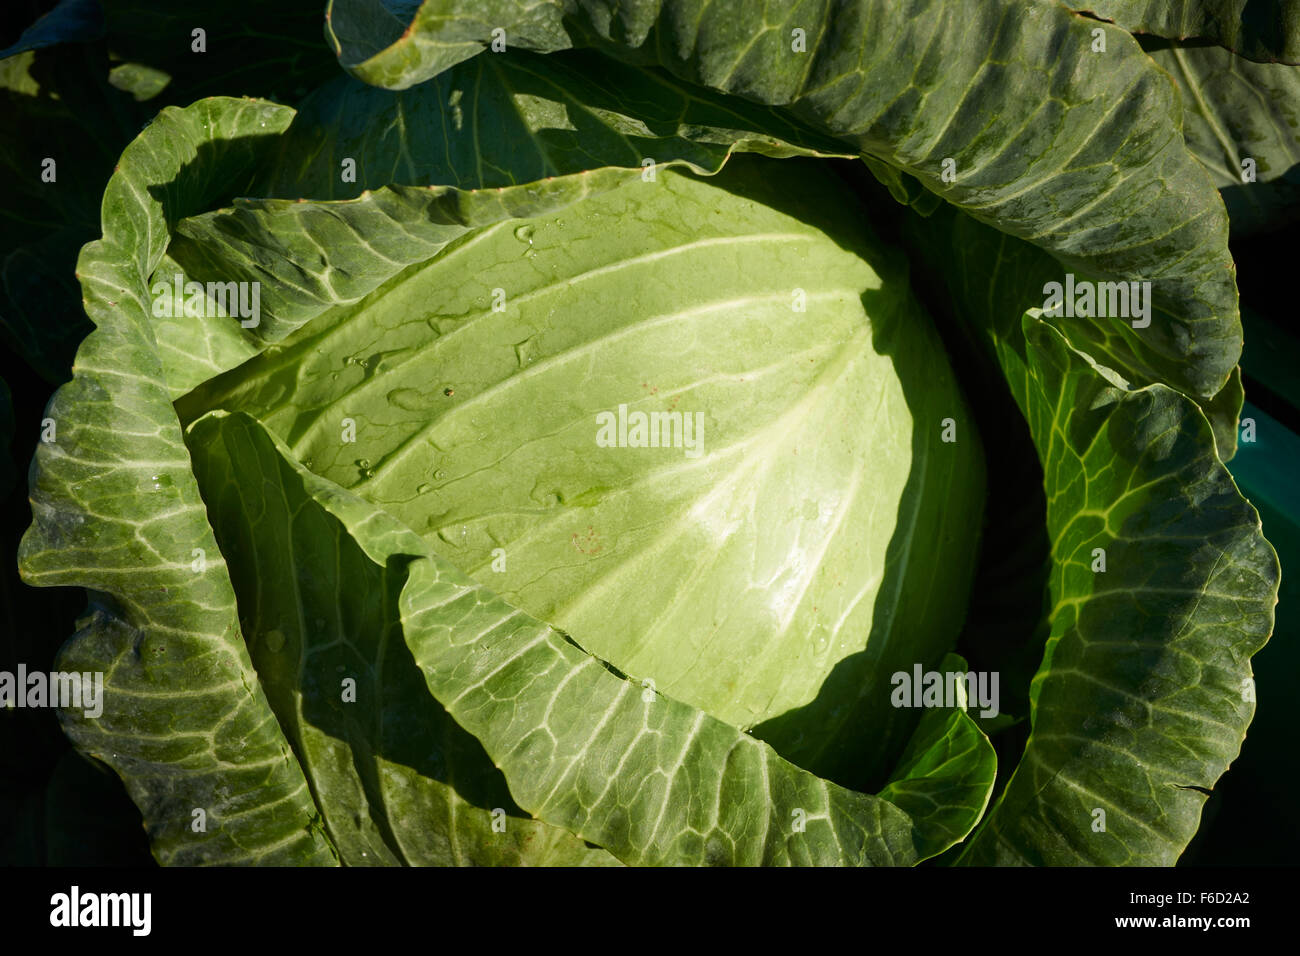 A whole head of green cabbage Stock Photo